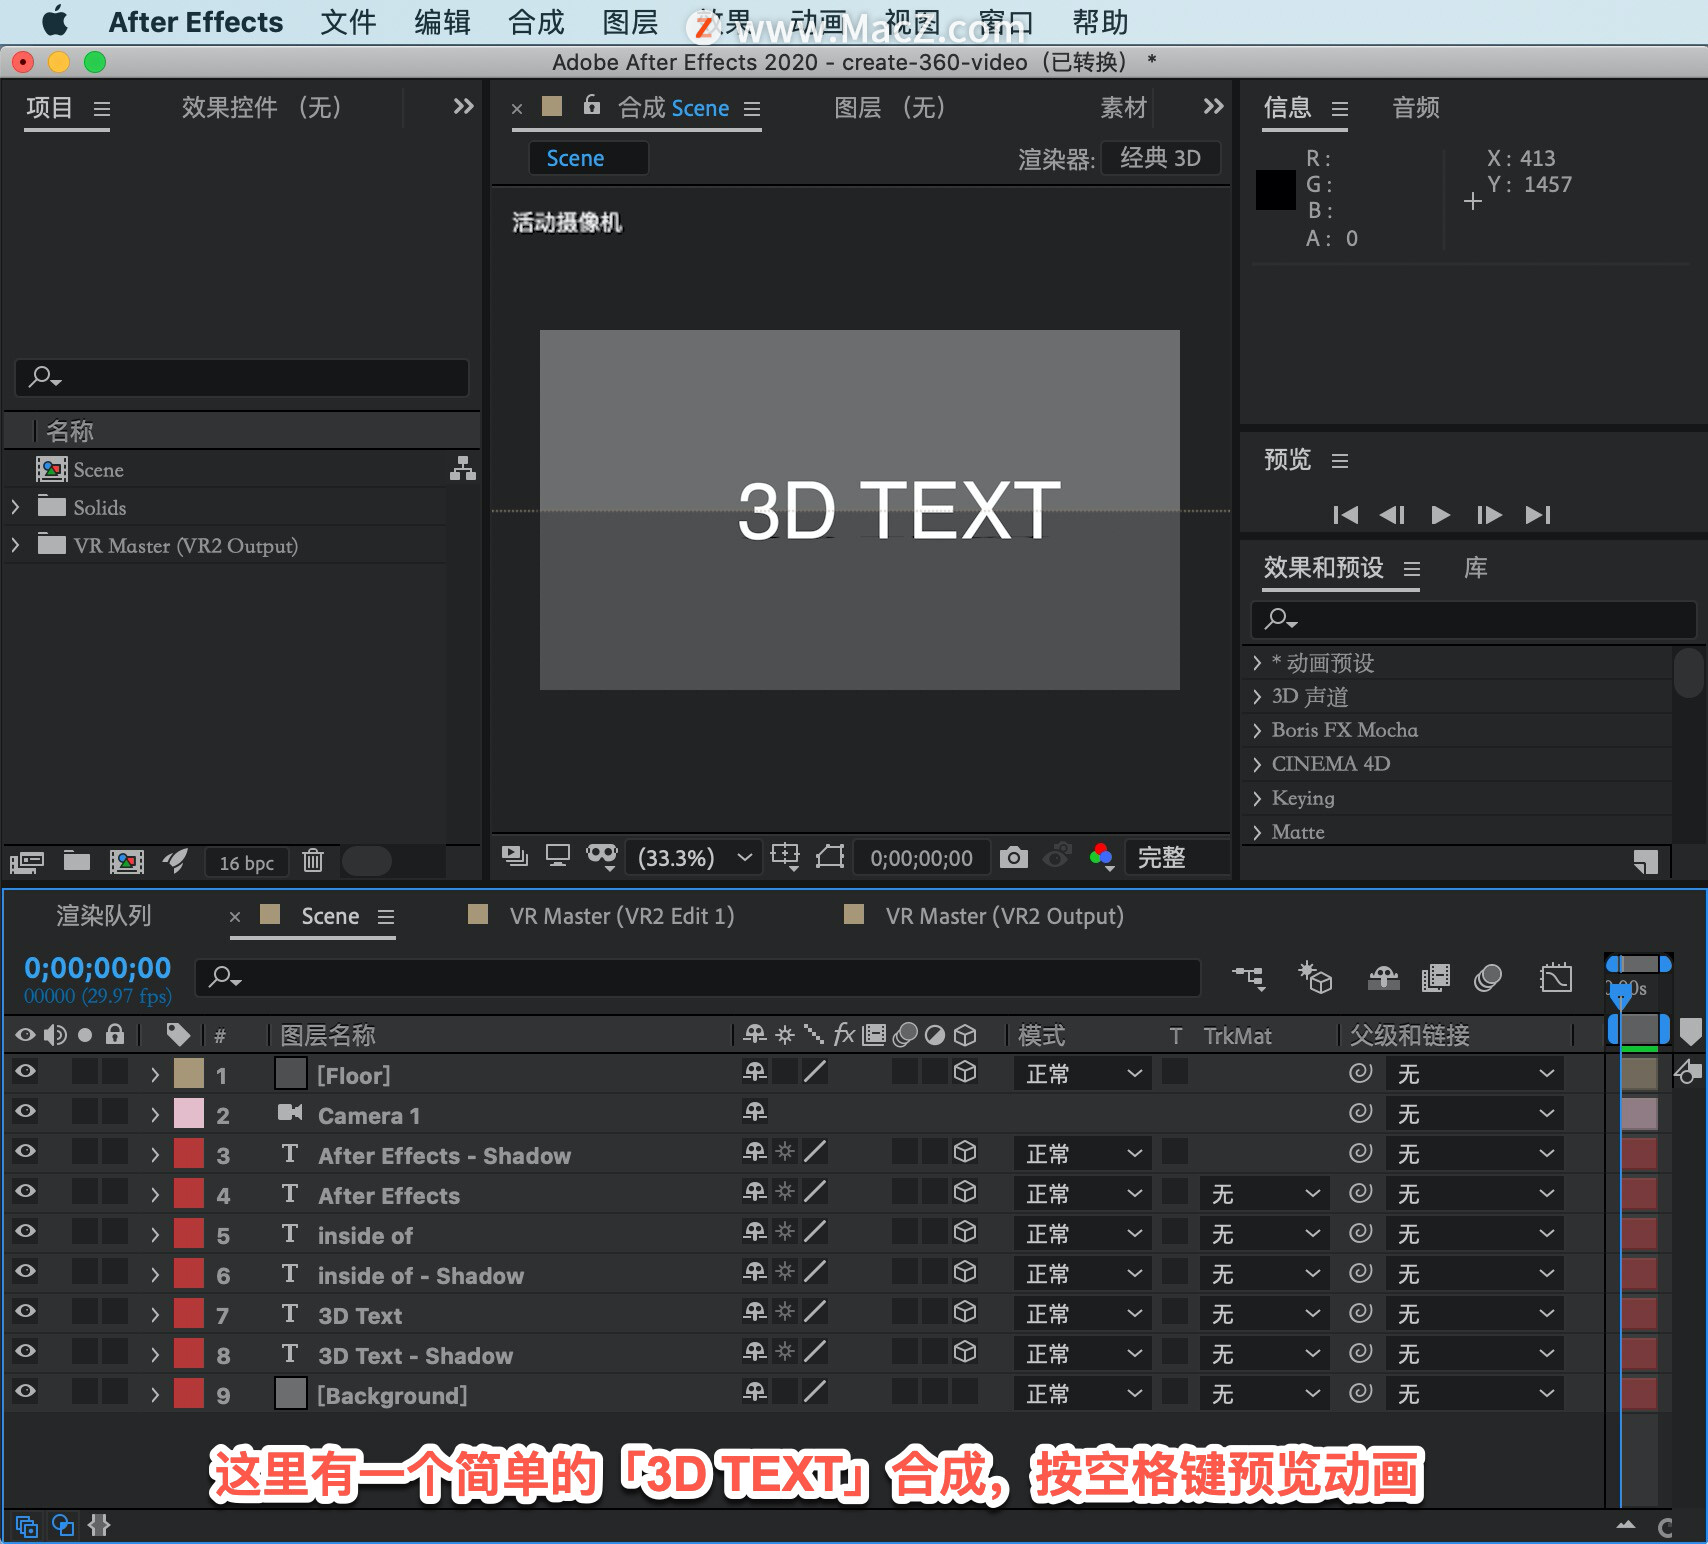 After Effects ̡̳75 After Effects ʹ VR Comp Editor